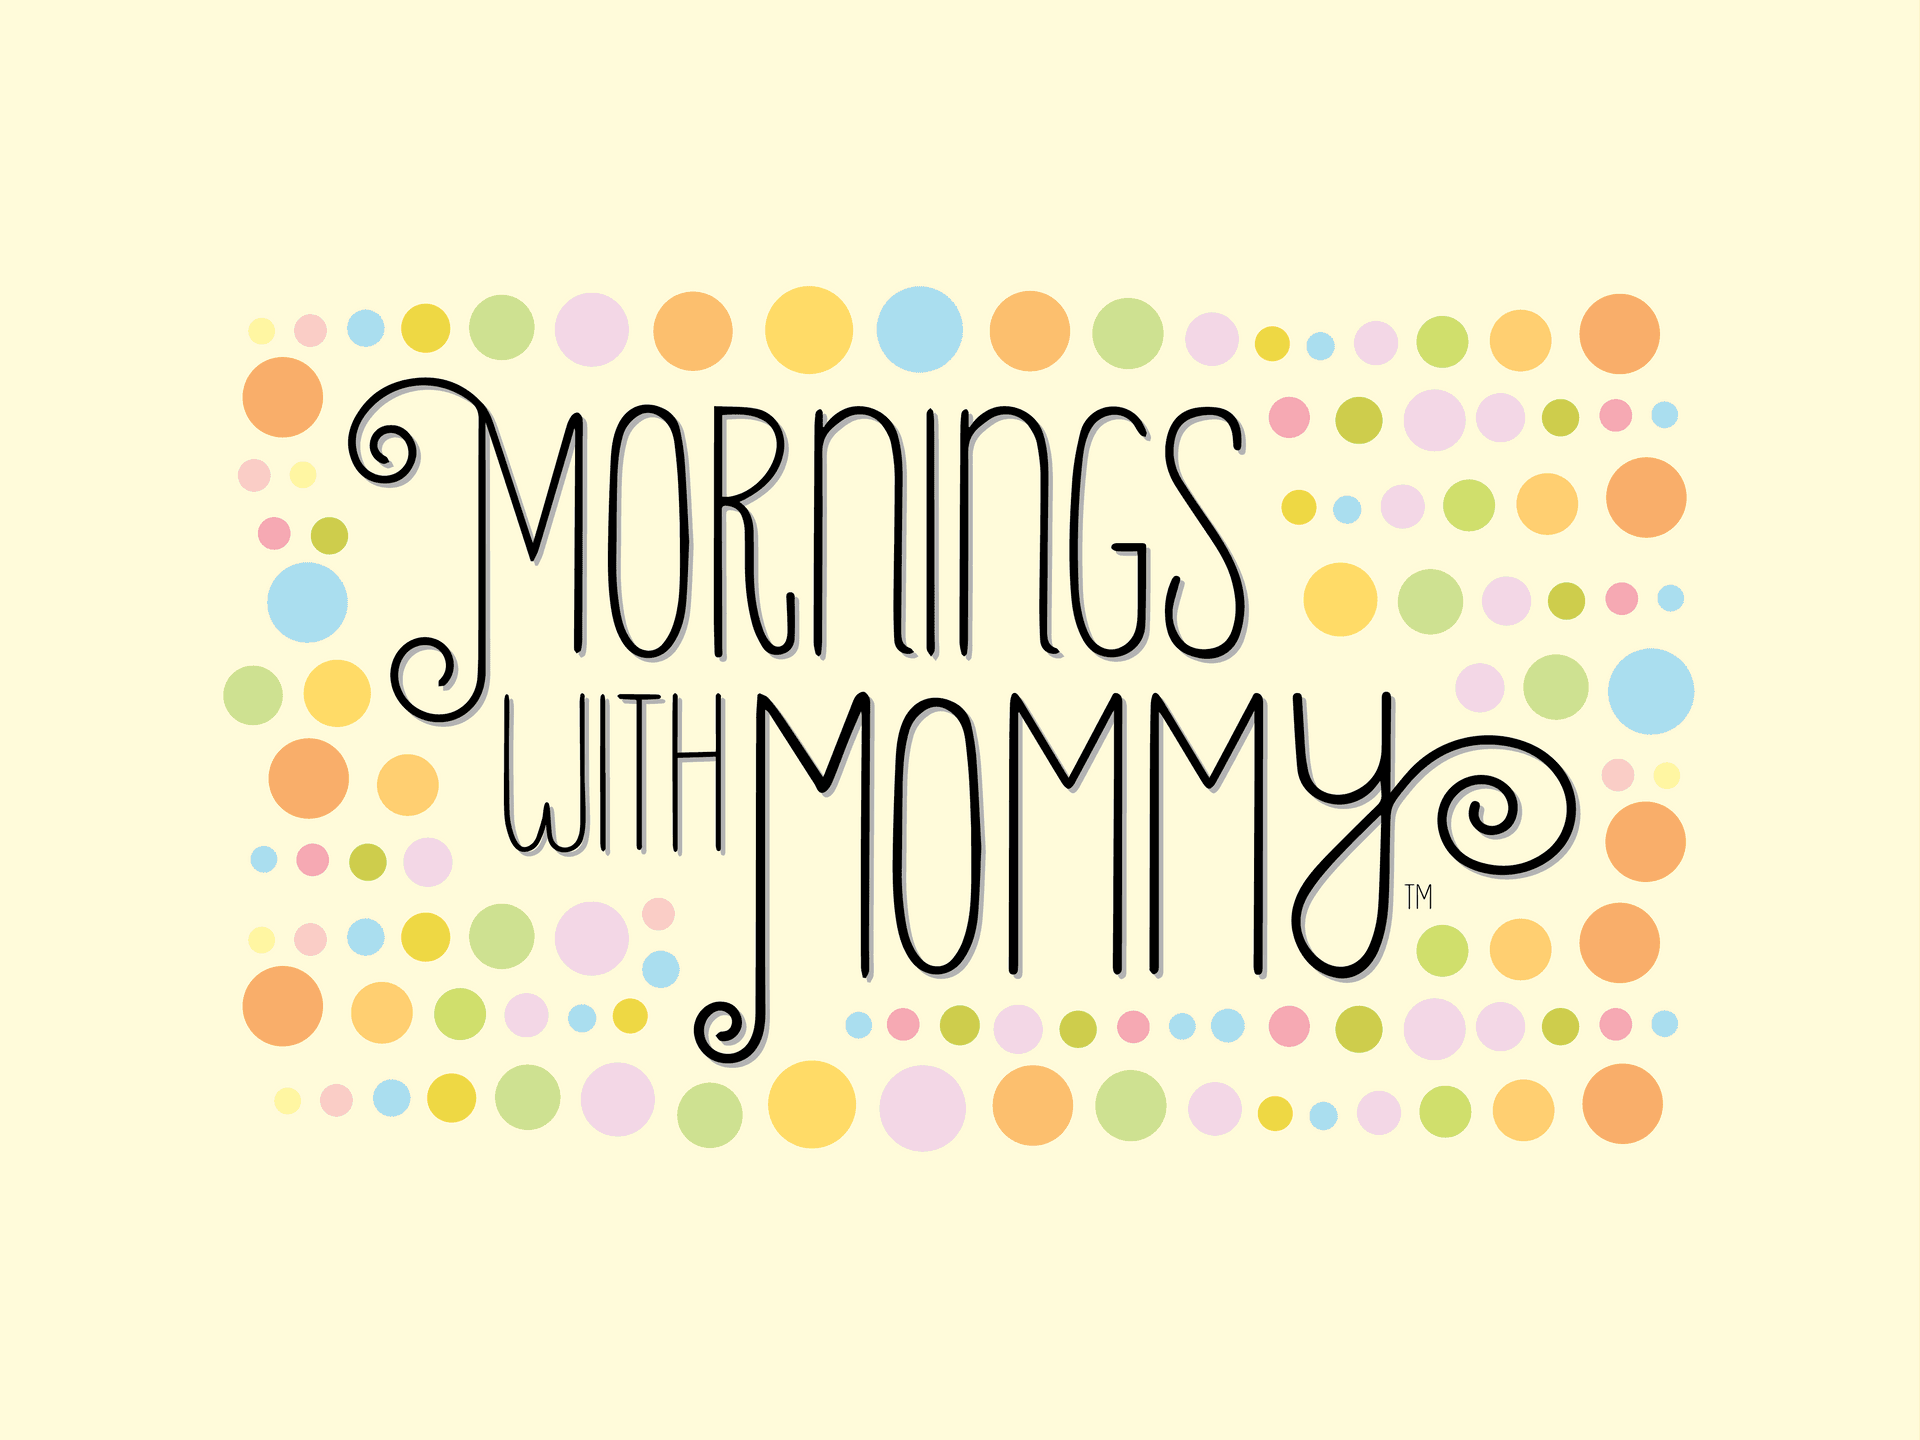 Mornings with Mommy, early childhood learning activities